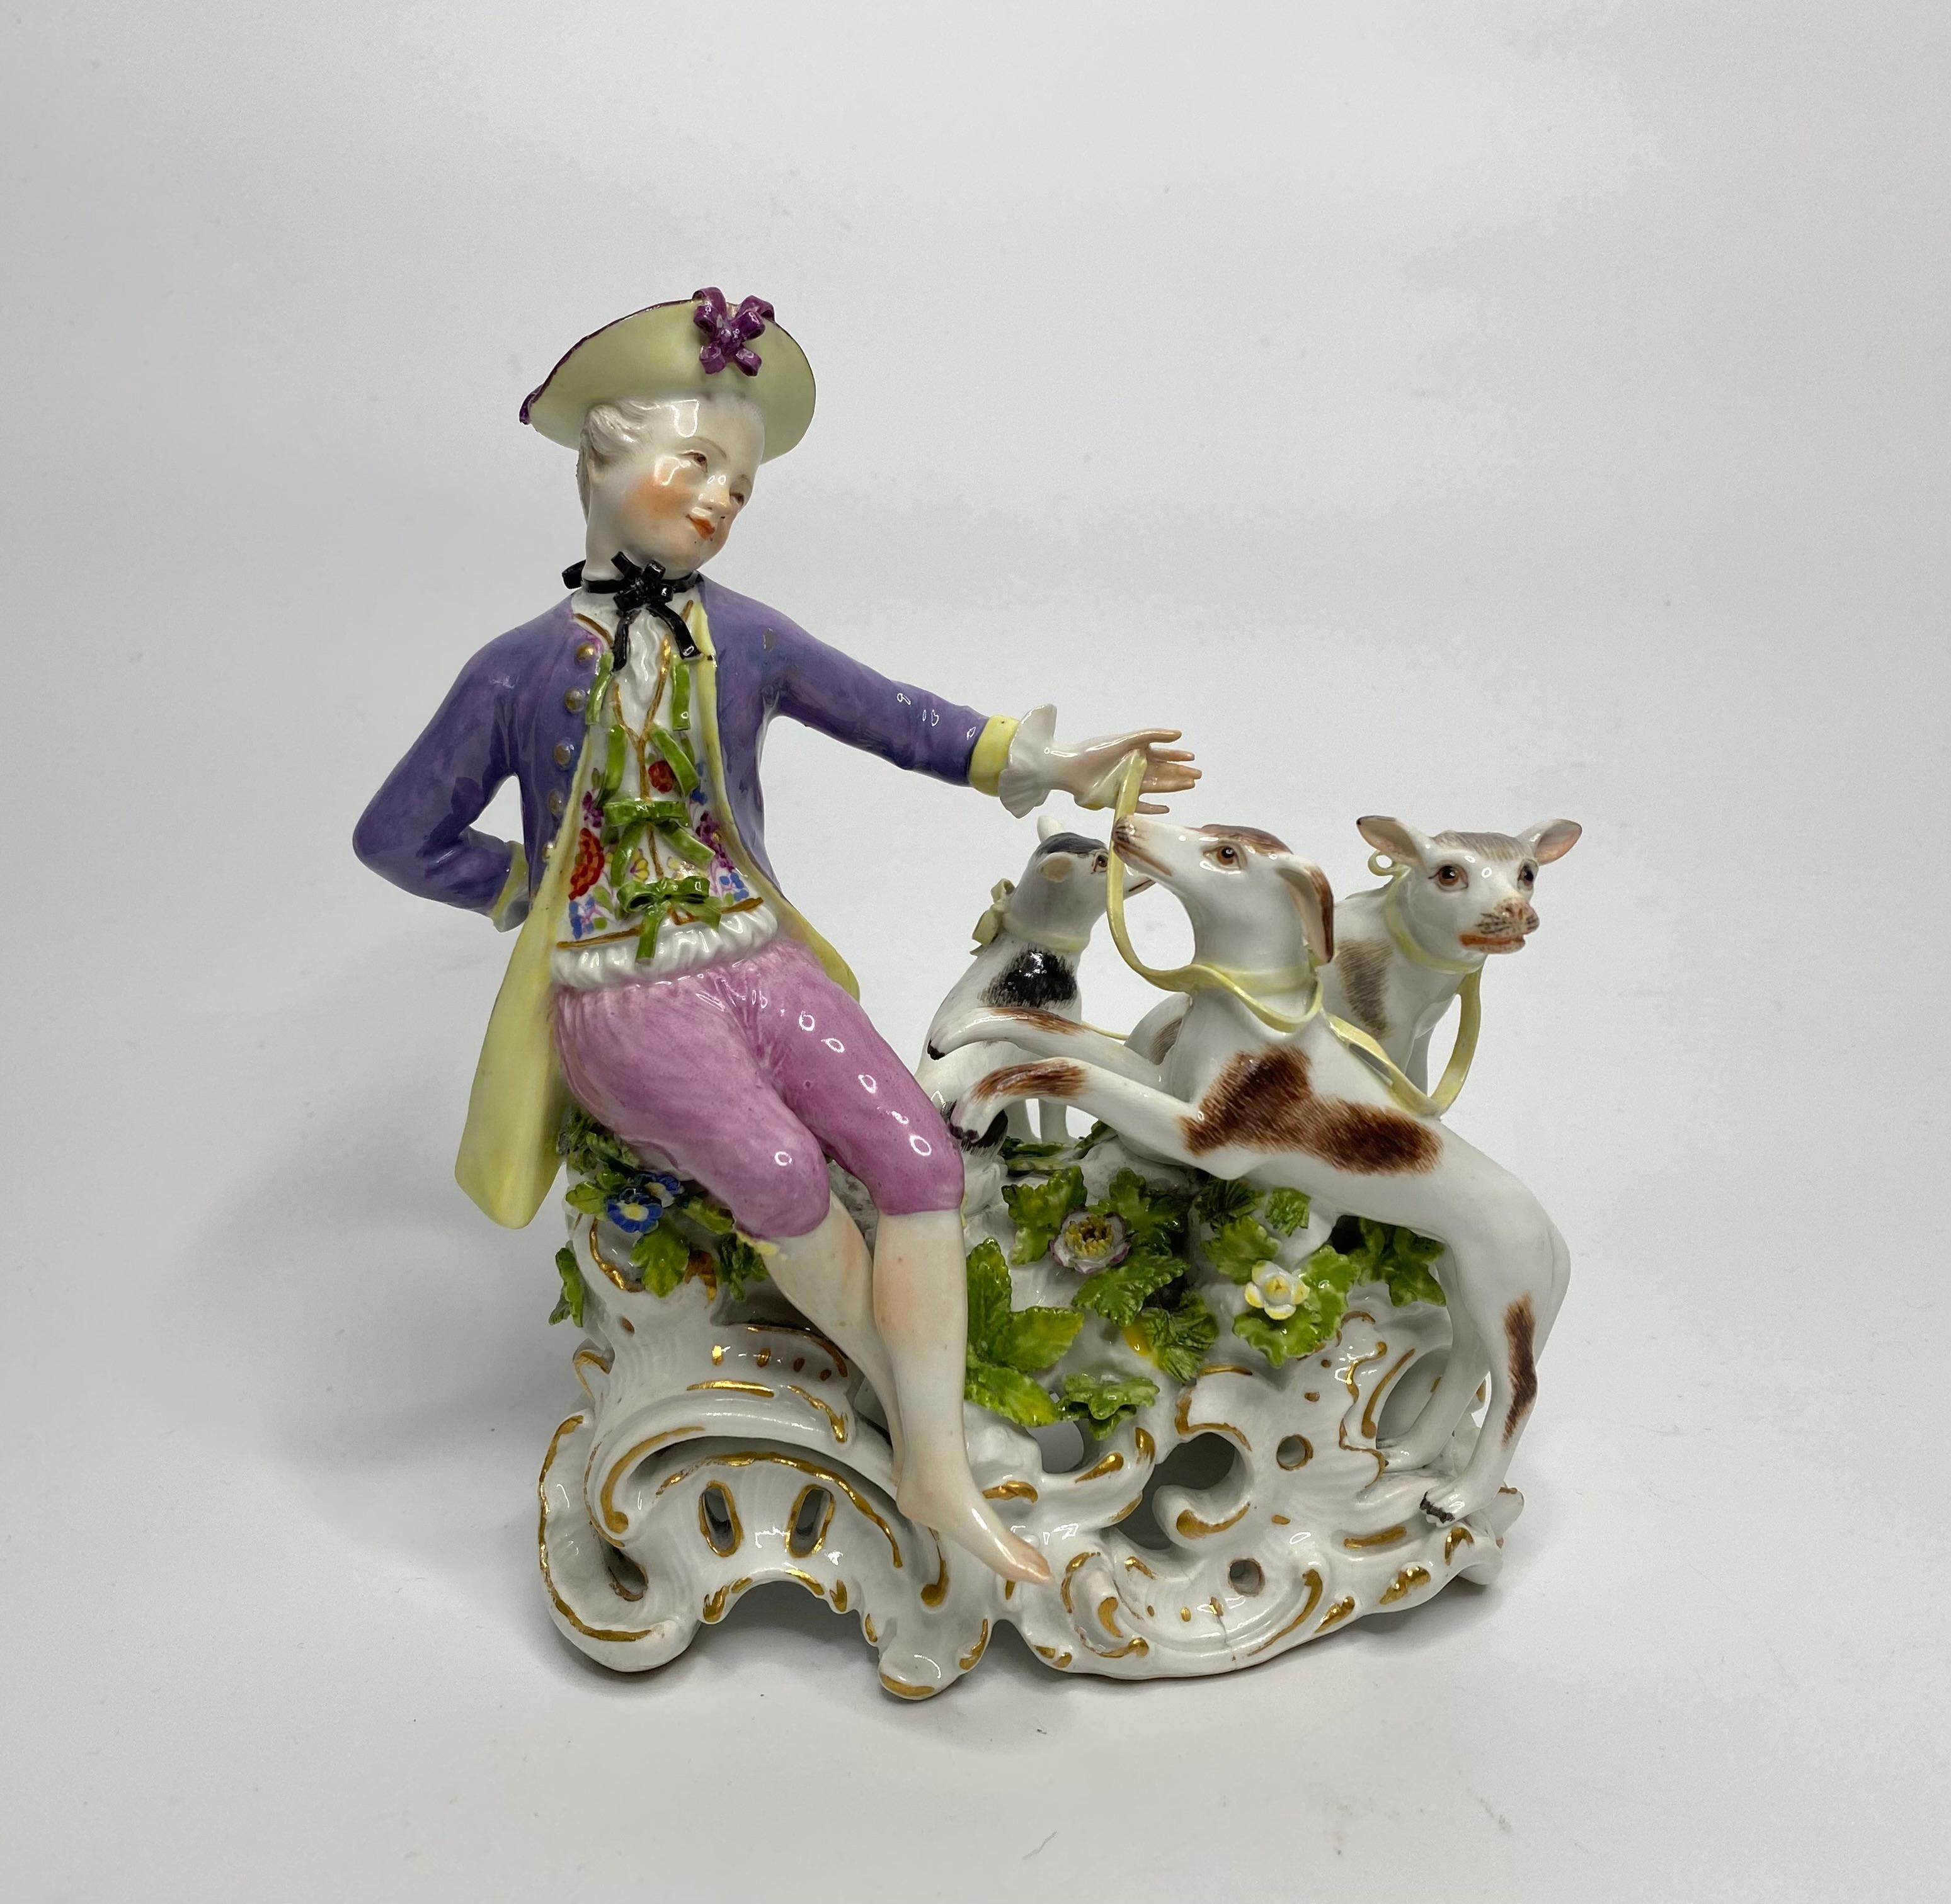 A fine pair of Meissen porcelain figure groups, c.1765 -1775. Elaborately modelled by Carl Christoph Punct, as a shepherd and shepherdess, in 18th Century dress, and set upon open rocaille bases.
The bare footed shepherd with three hounds, above a